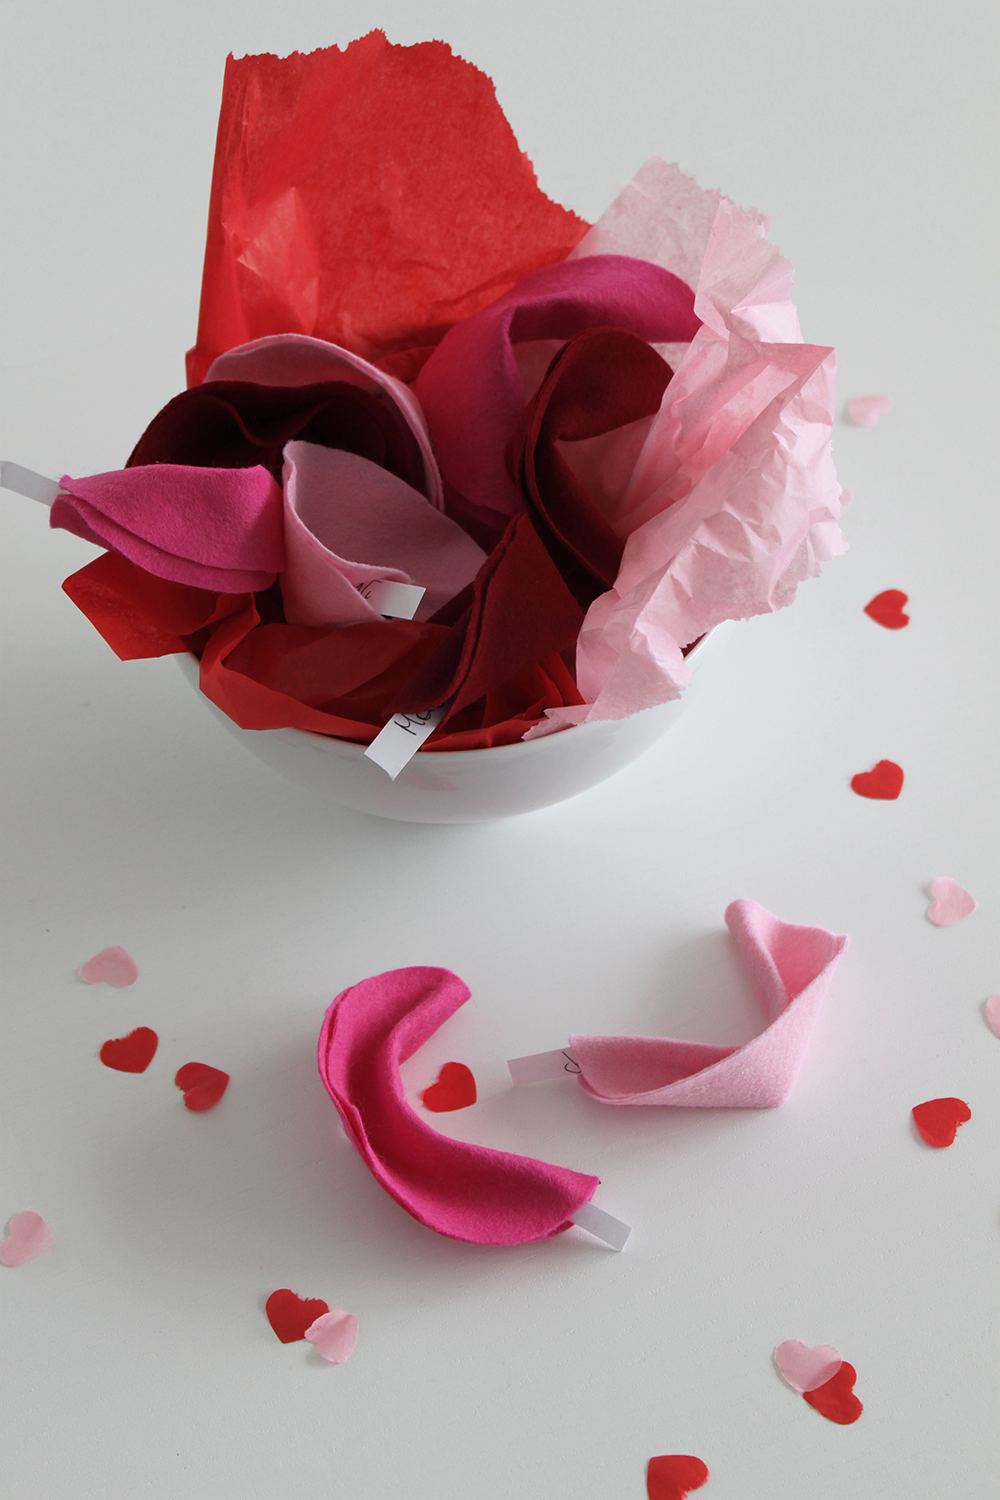 who is mocca, fashionblog, beautyblog, blogger tirol, austria, oesterreich, valentinstag, valentines day, dos and donts, valentinstag diy, glueckskekse, fortune cookies